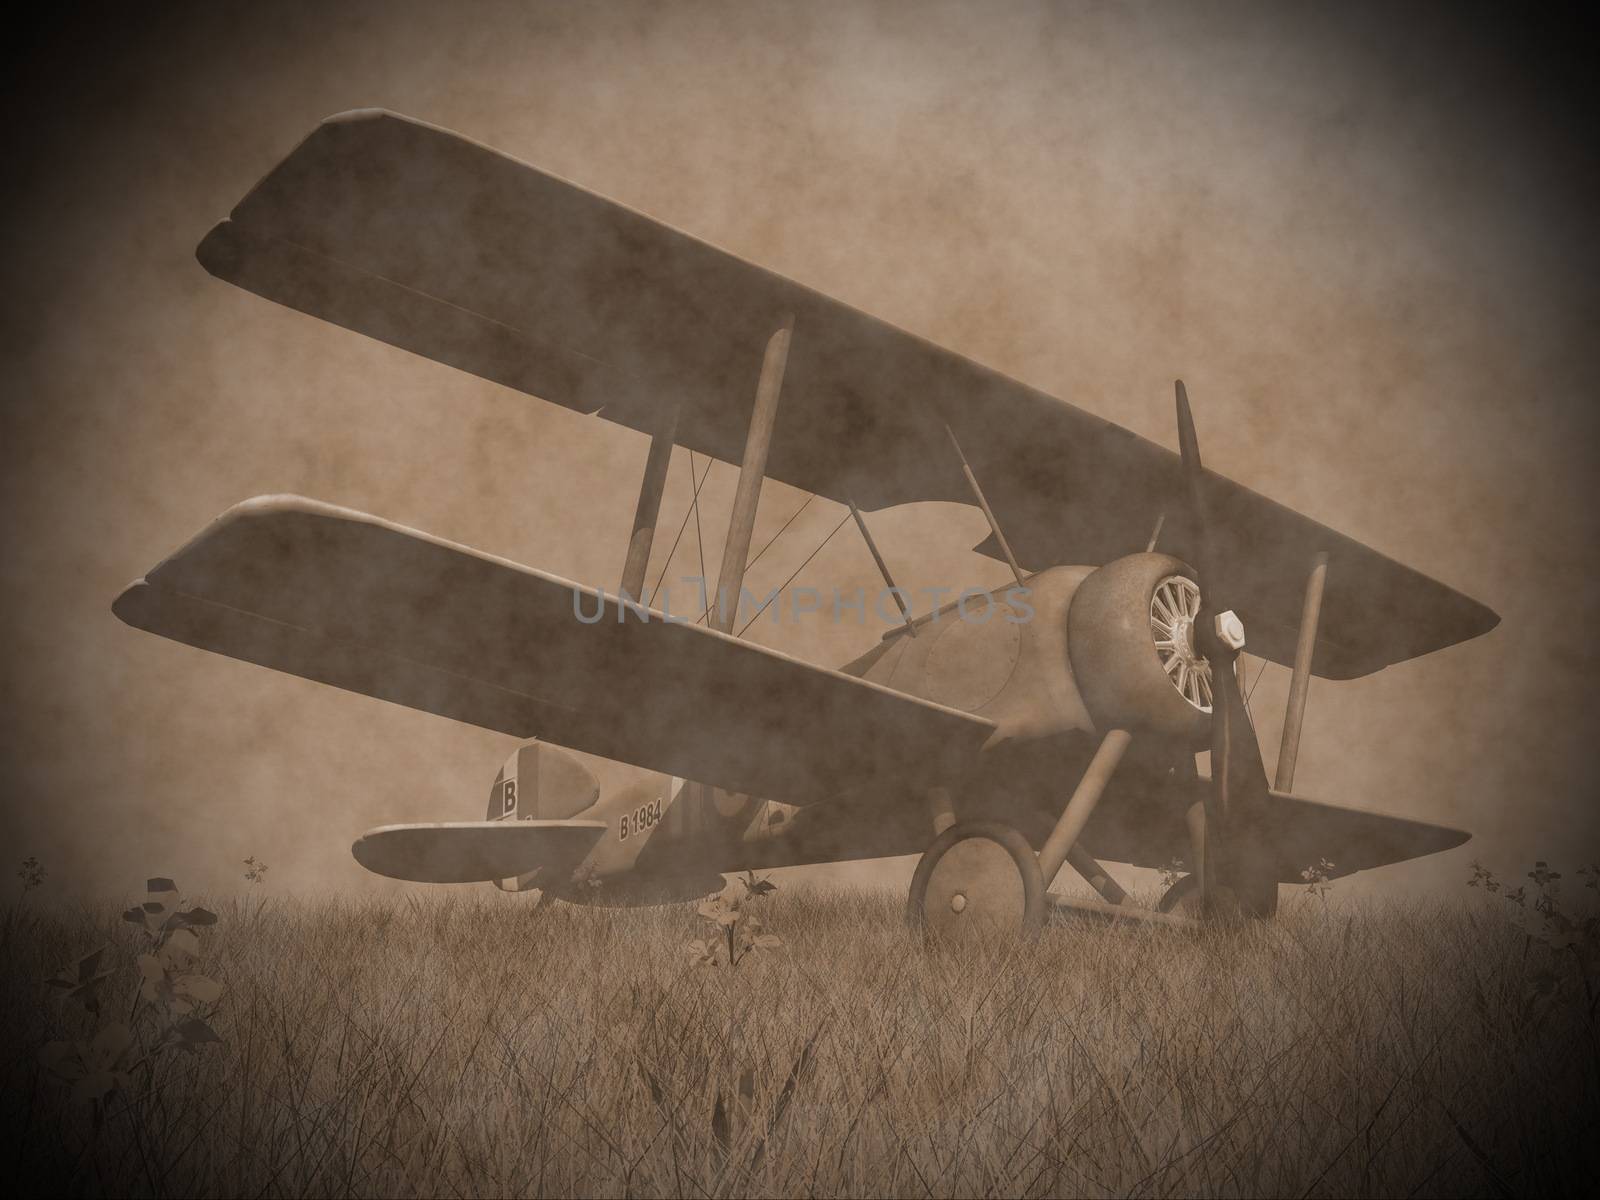 Biplane on the grass - 3D render by Elenaphotos21